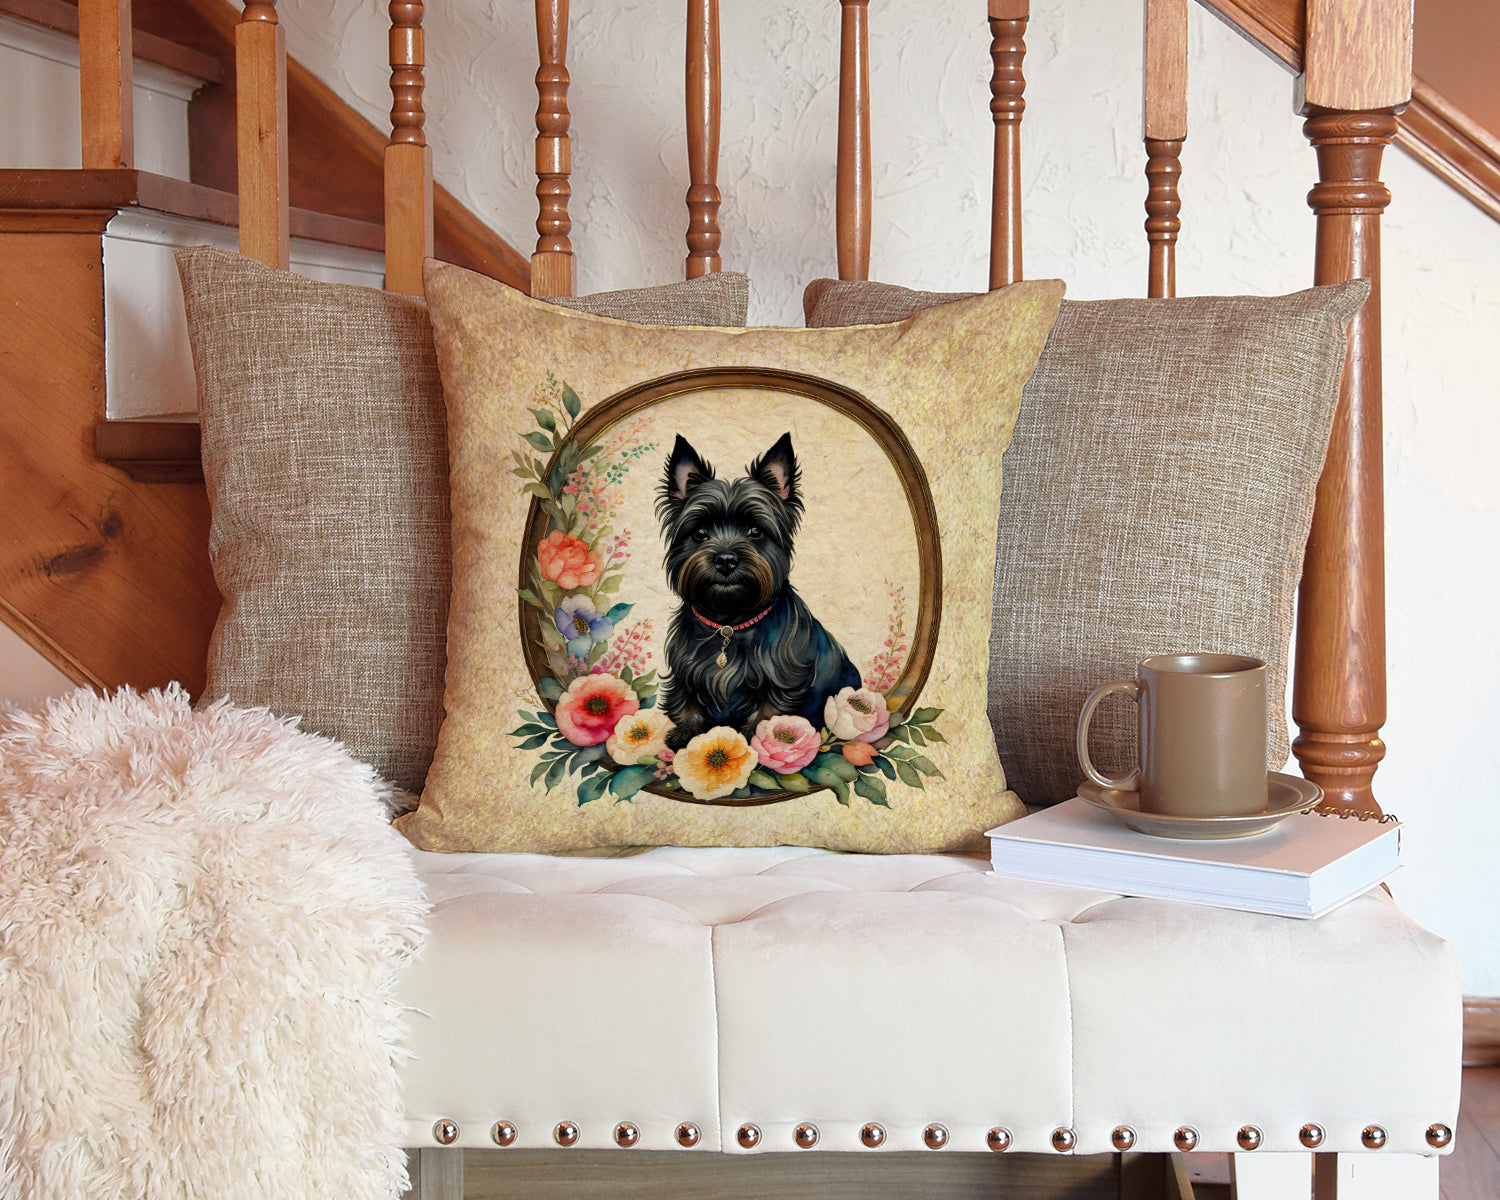 Cairn Terrier and Flowers Fabric Decorative Pillow